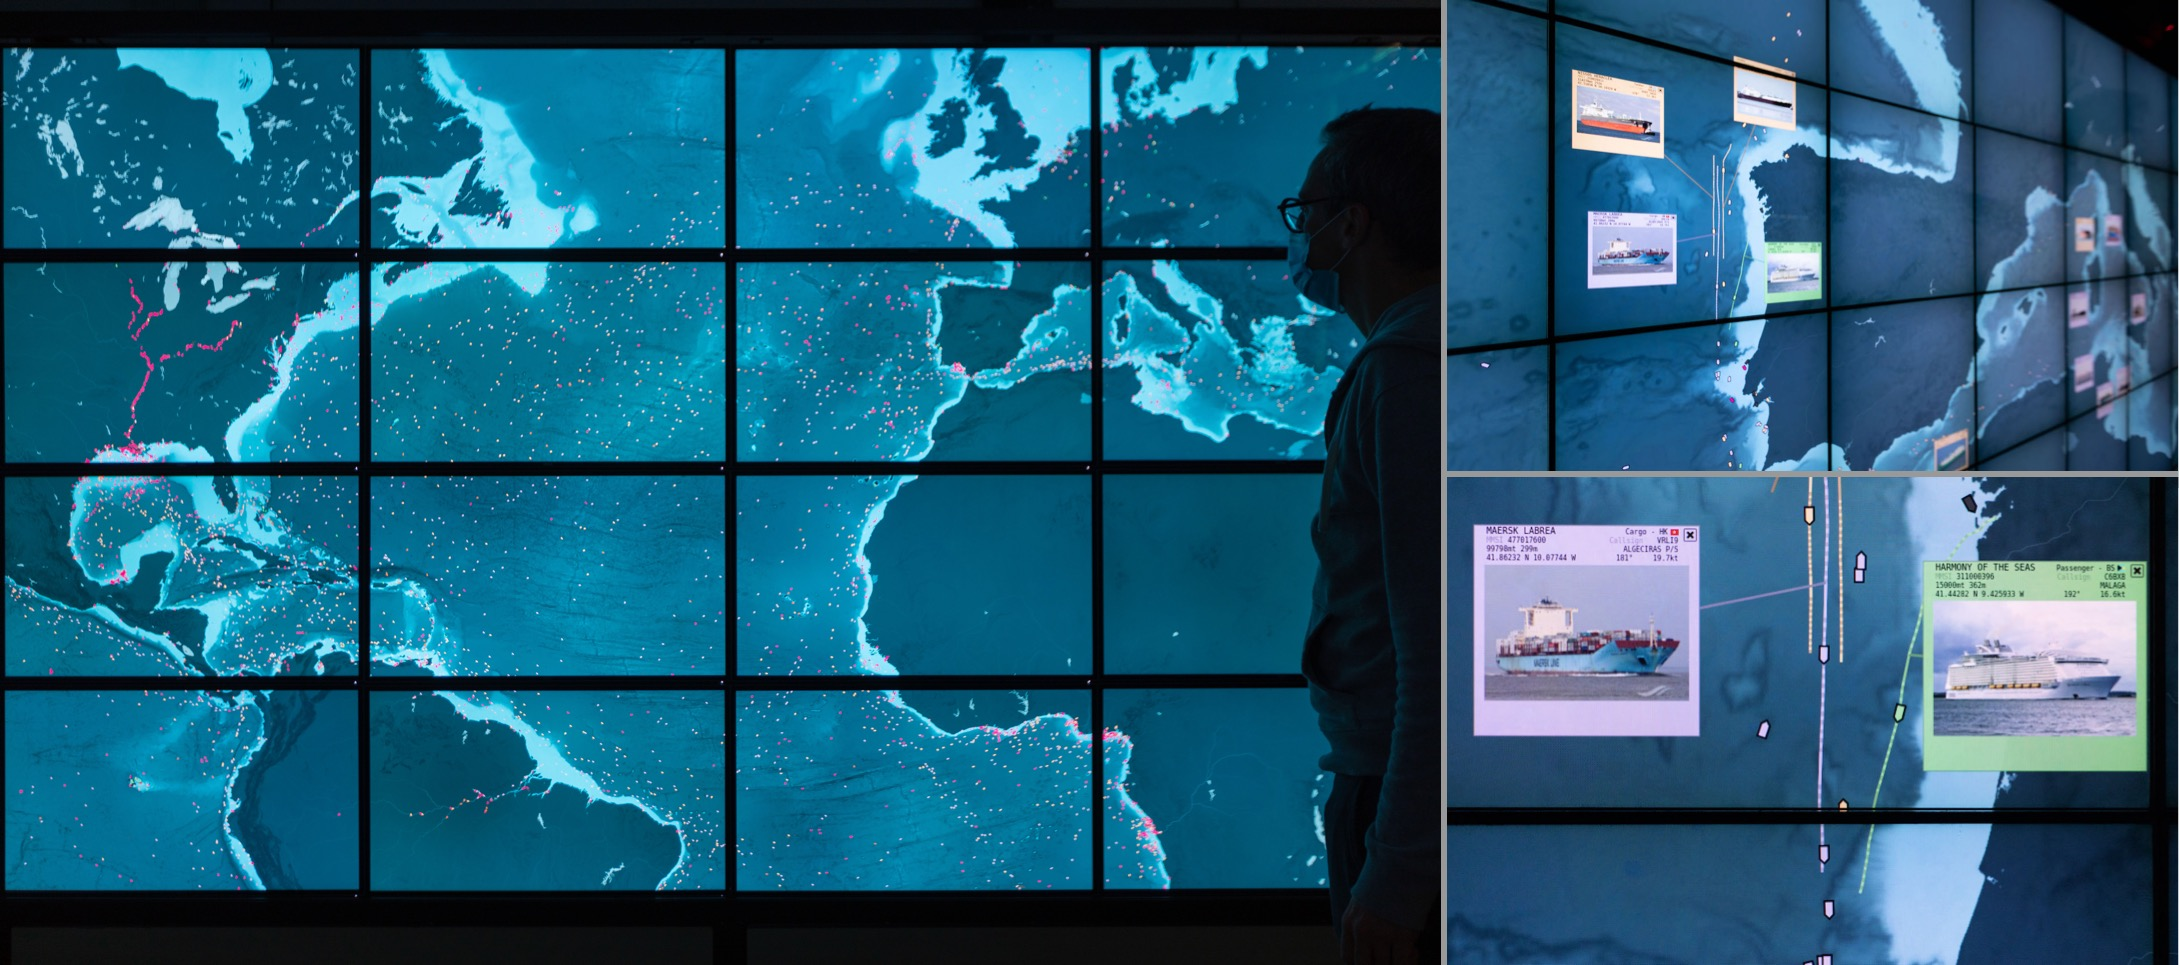 Three pictures of the WILD-512K ultra wall displaying data about ships on a map of the world, at varying levels of detail.